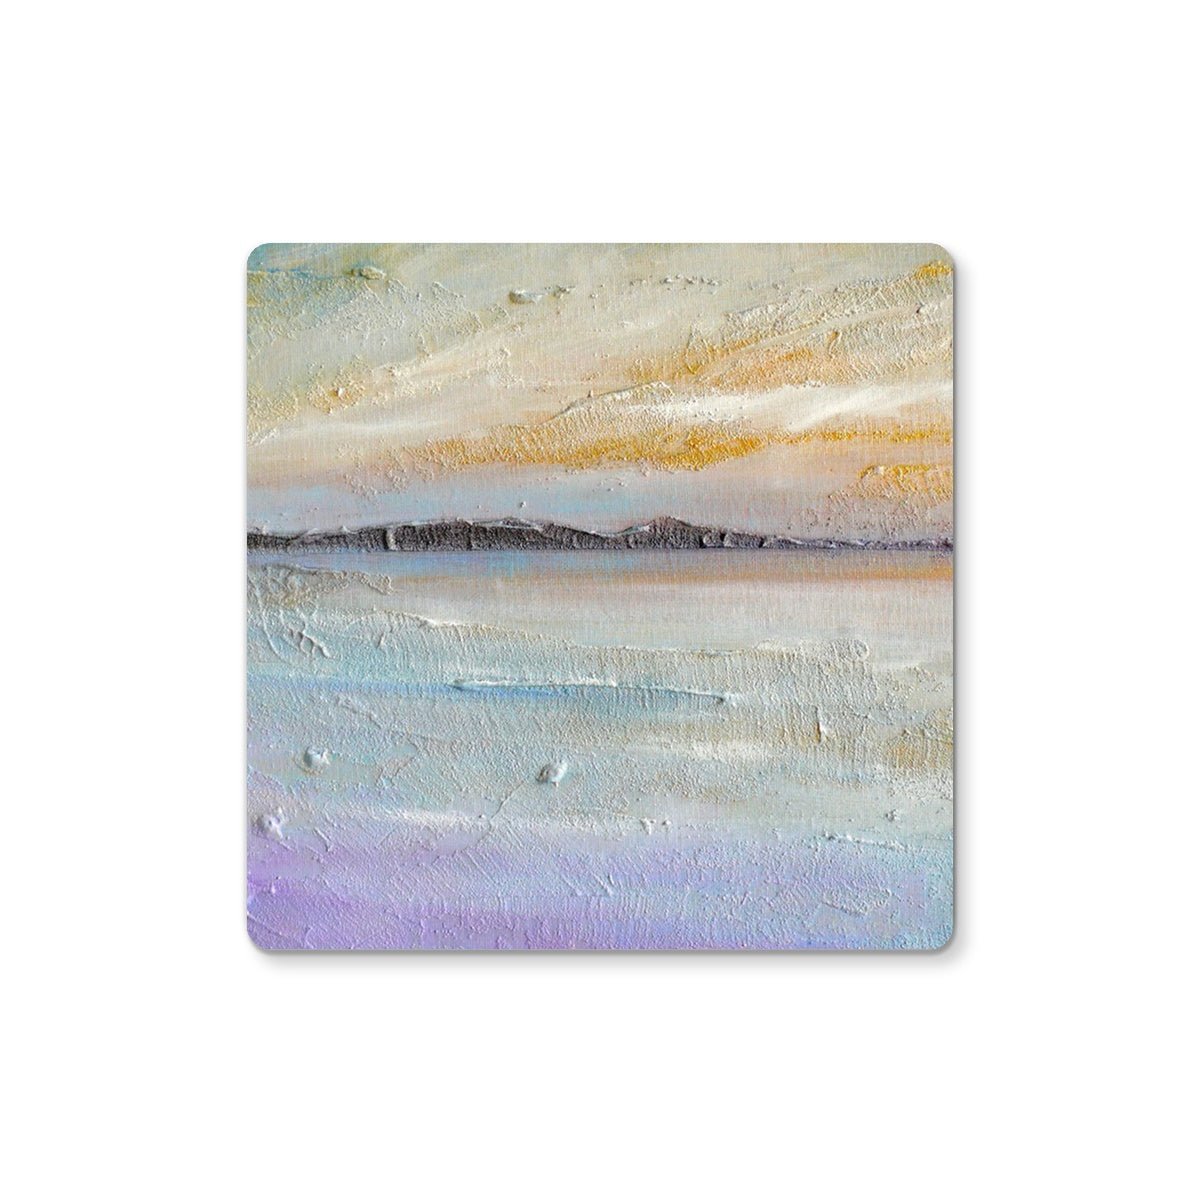 Sollas Beach North Uist Art Gifts Coaster-Coasters-Hebridean Islands Art Gallery-2 Coasters-Paintings, Prints, Homeware, Art Gifts From Scotland By Scottish Artist Kevin Hunter